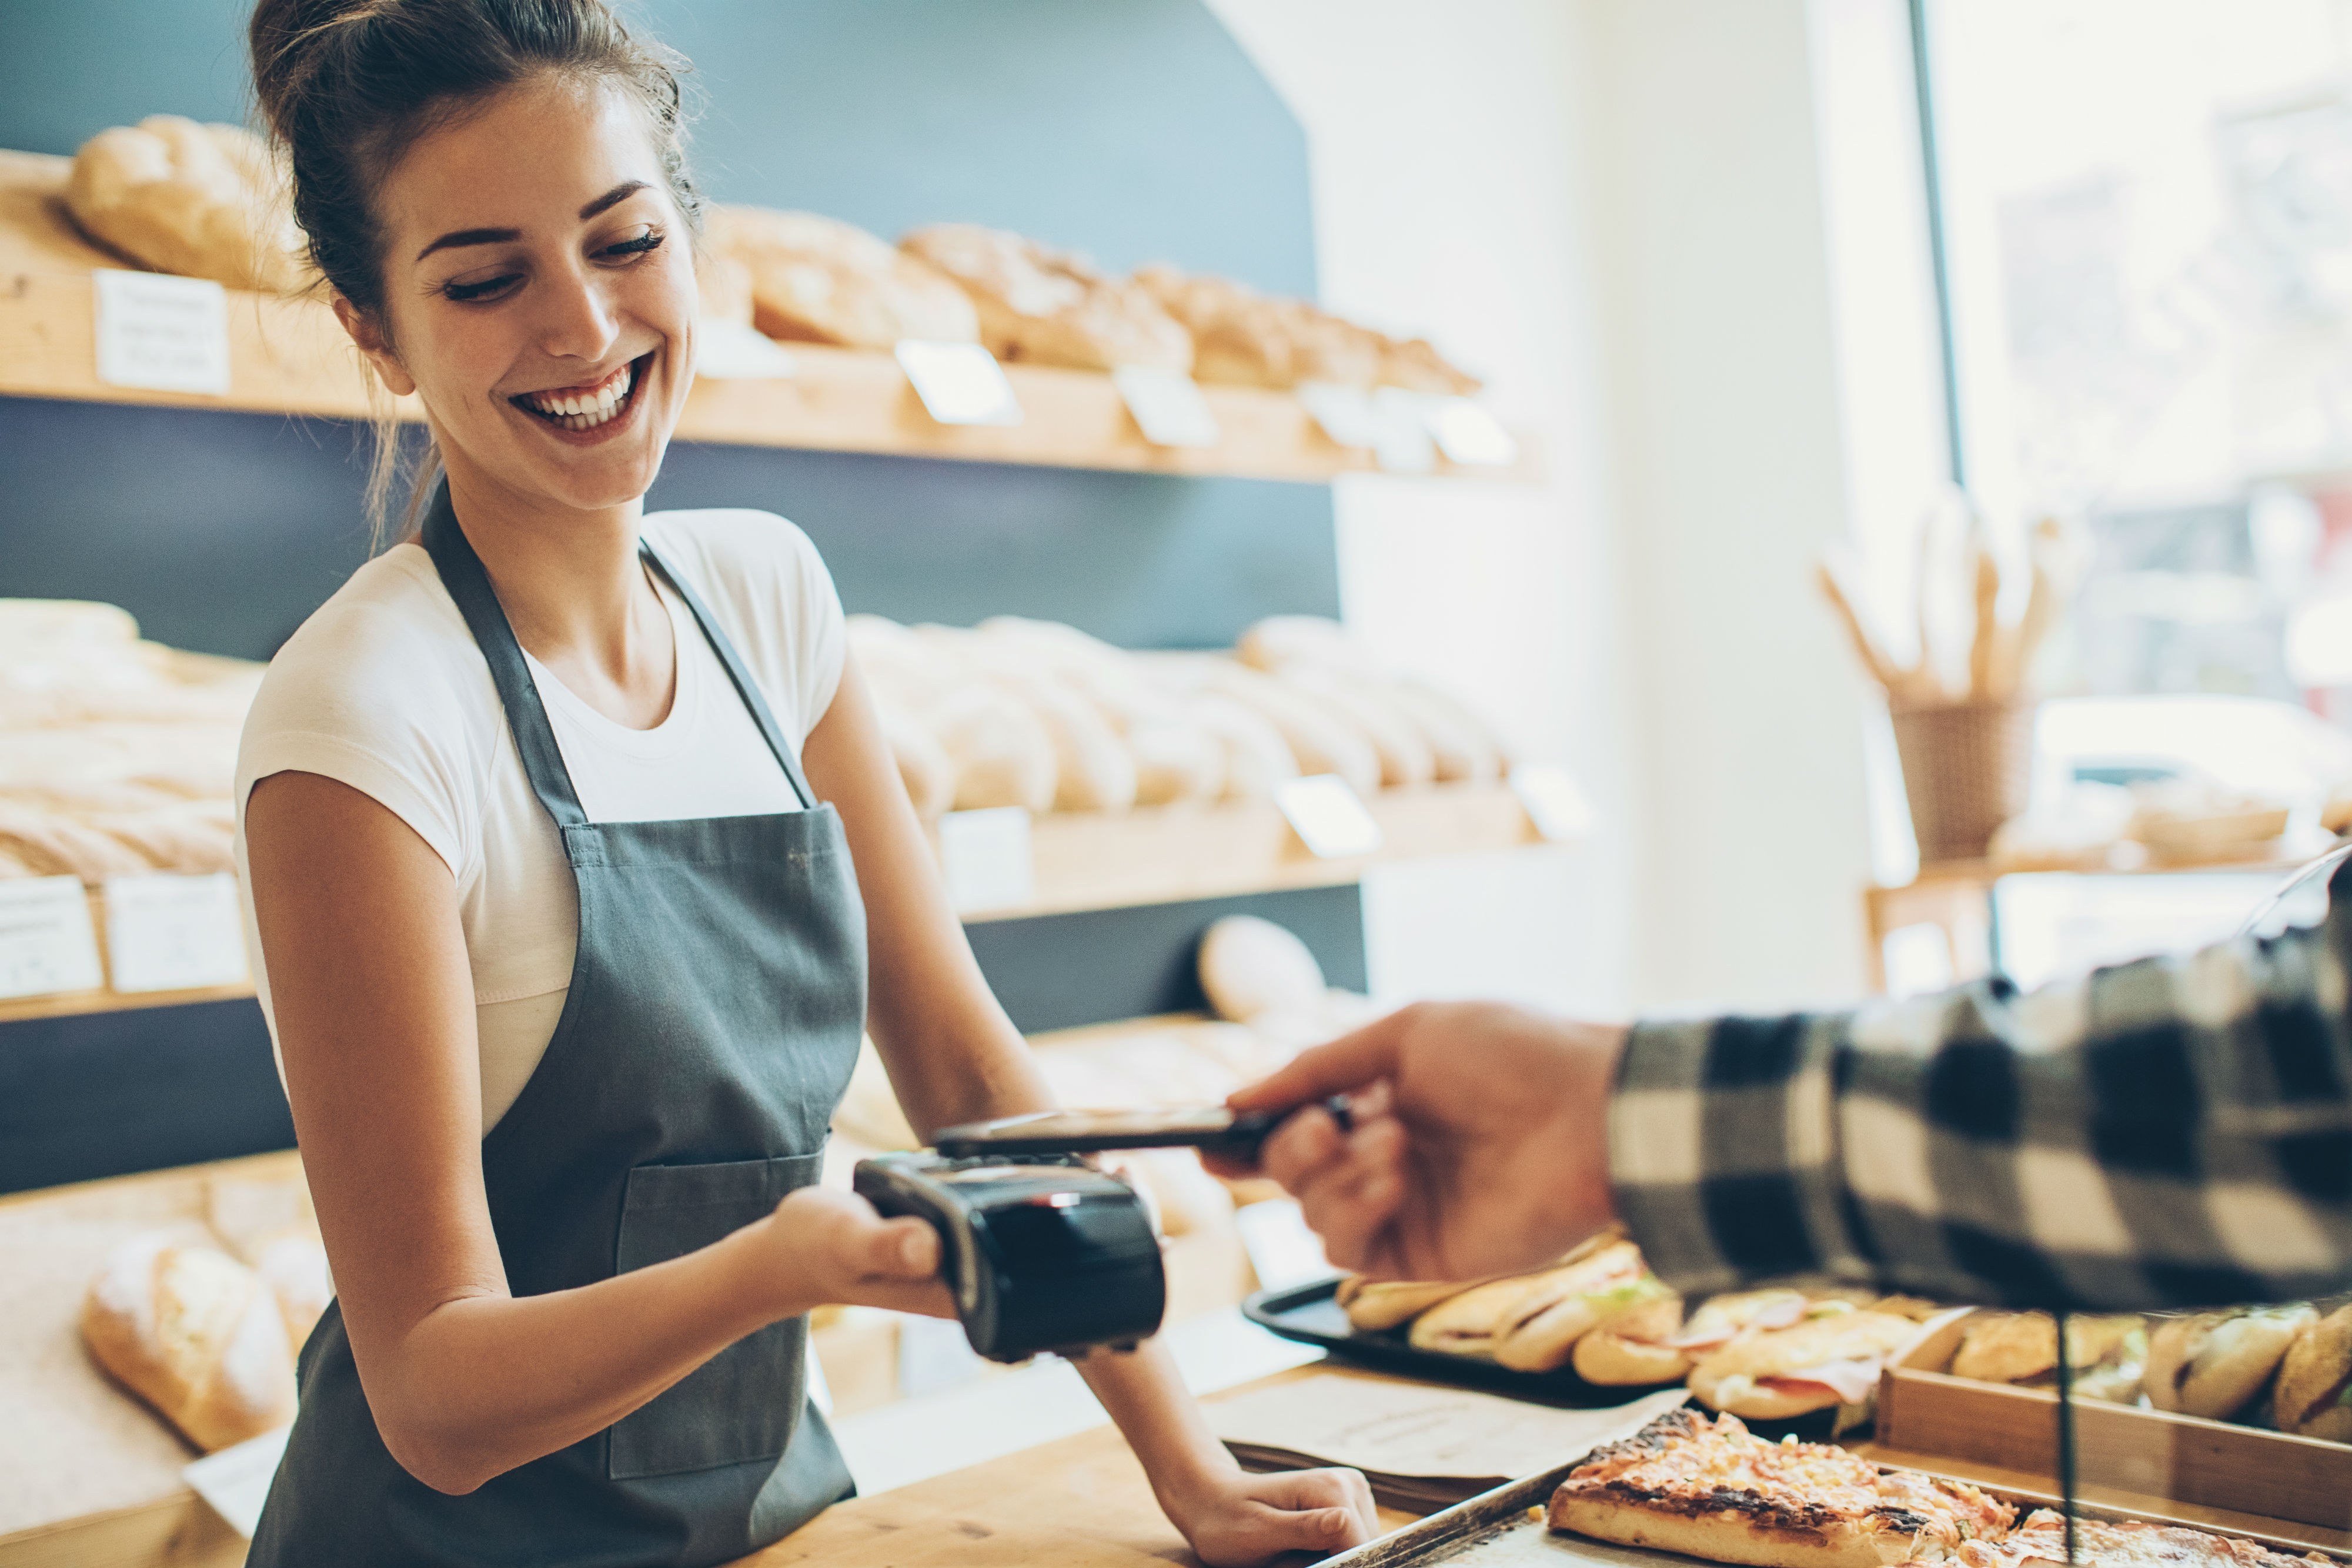 Woman Behind Bakery Counter Cashing Out Customer